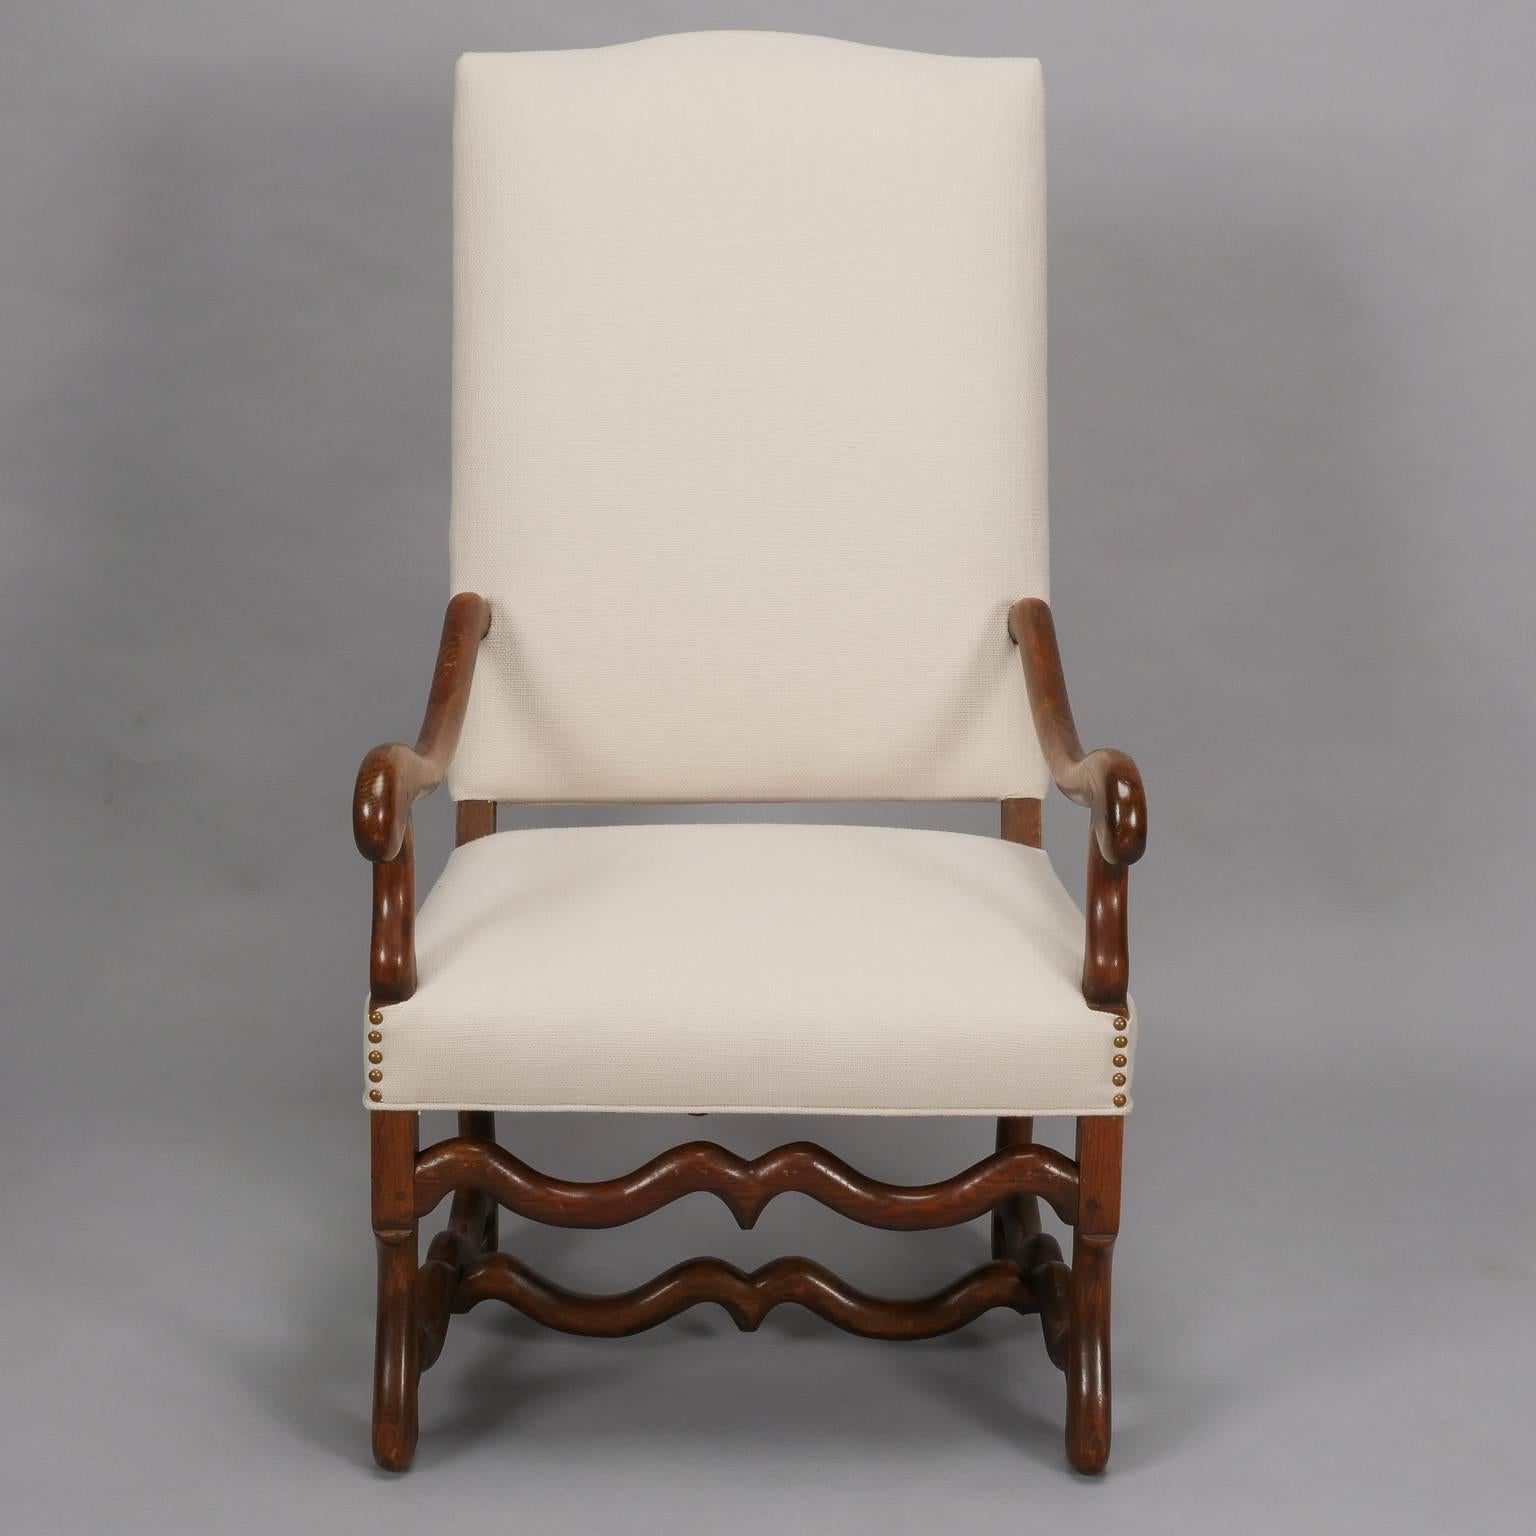 Pair of circa 1920s tall Os de Mouton arm chairs. Dark wood frames, and chairs have been newly upholstered in an off-white cotton/linen blend basket weave fabric. Sold and priced as a pair.

Measure: Arm height 25”
Seat height 19”
Seat depth